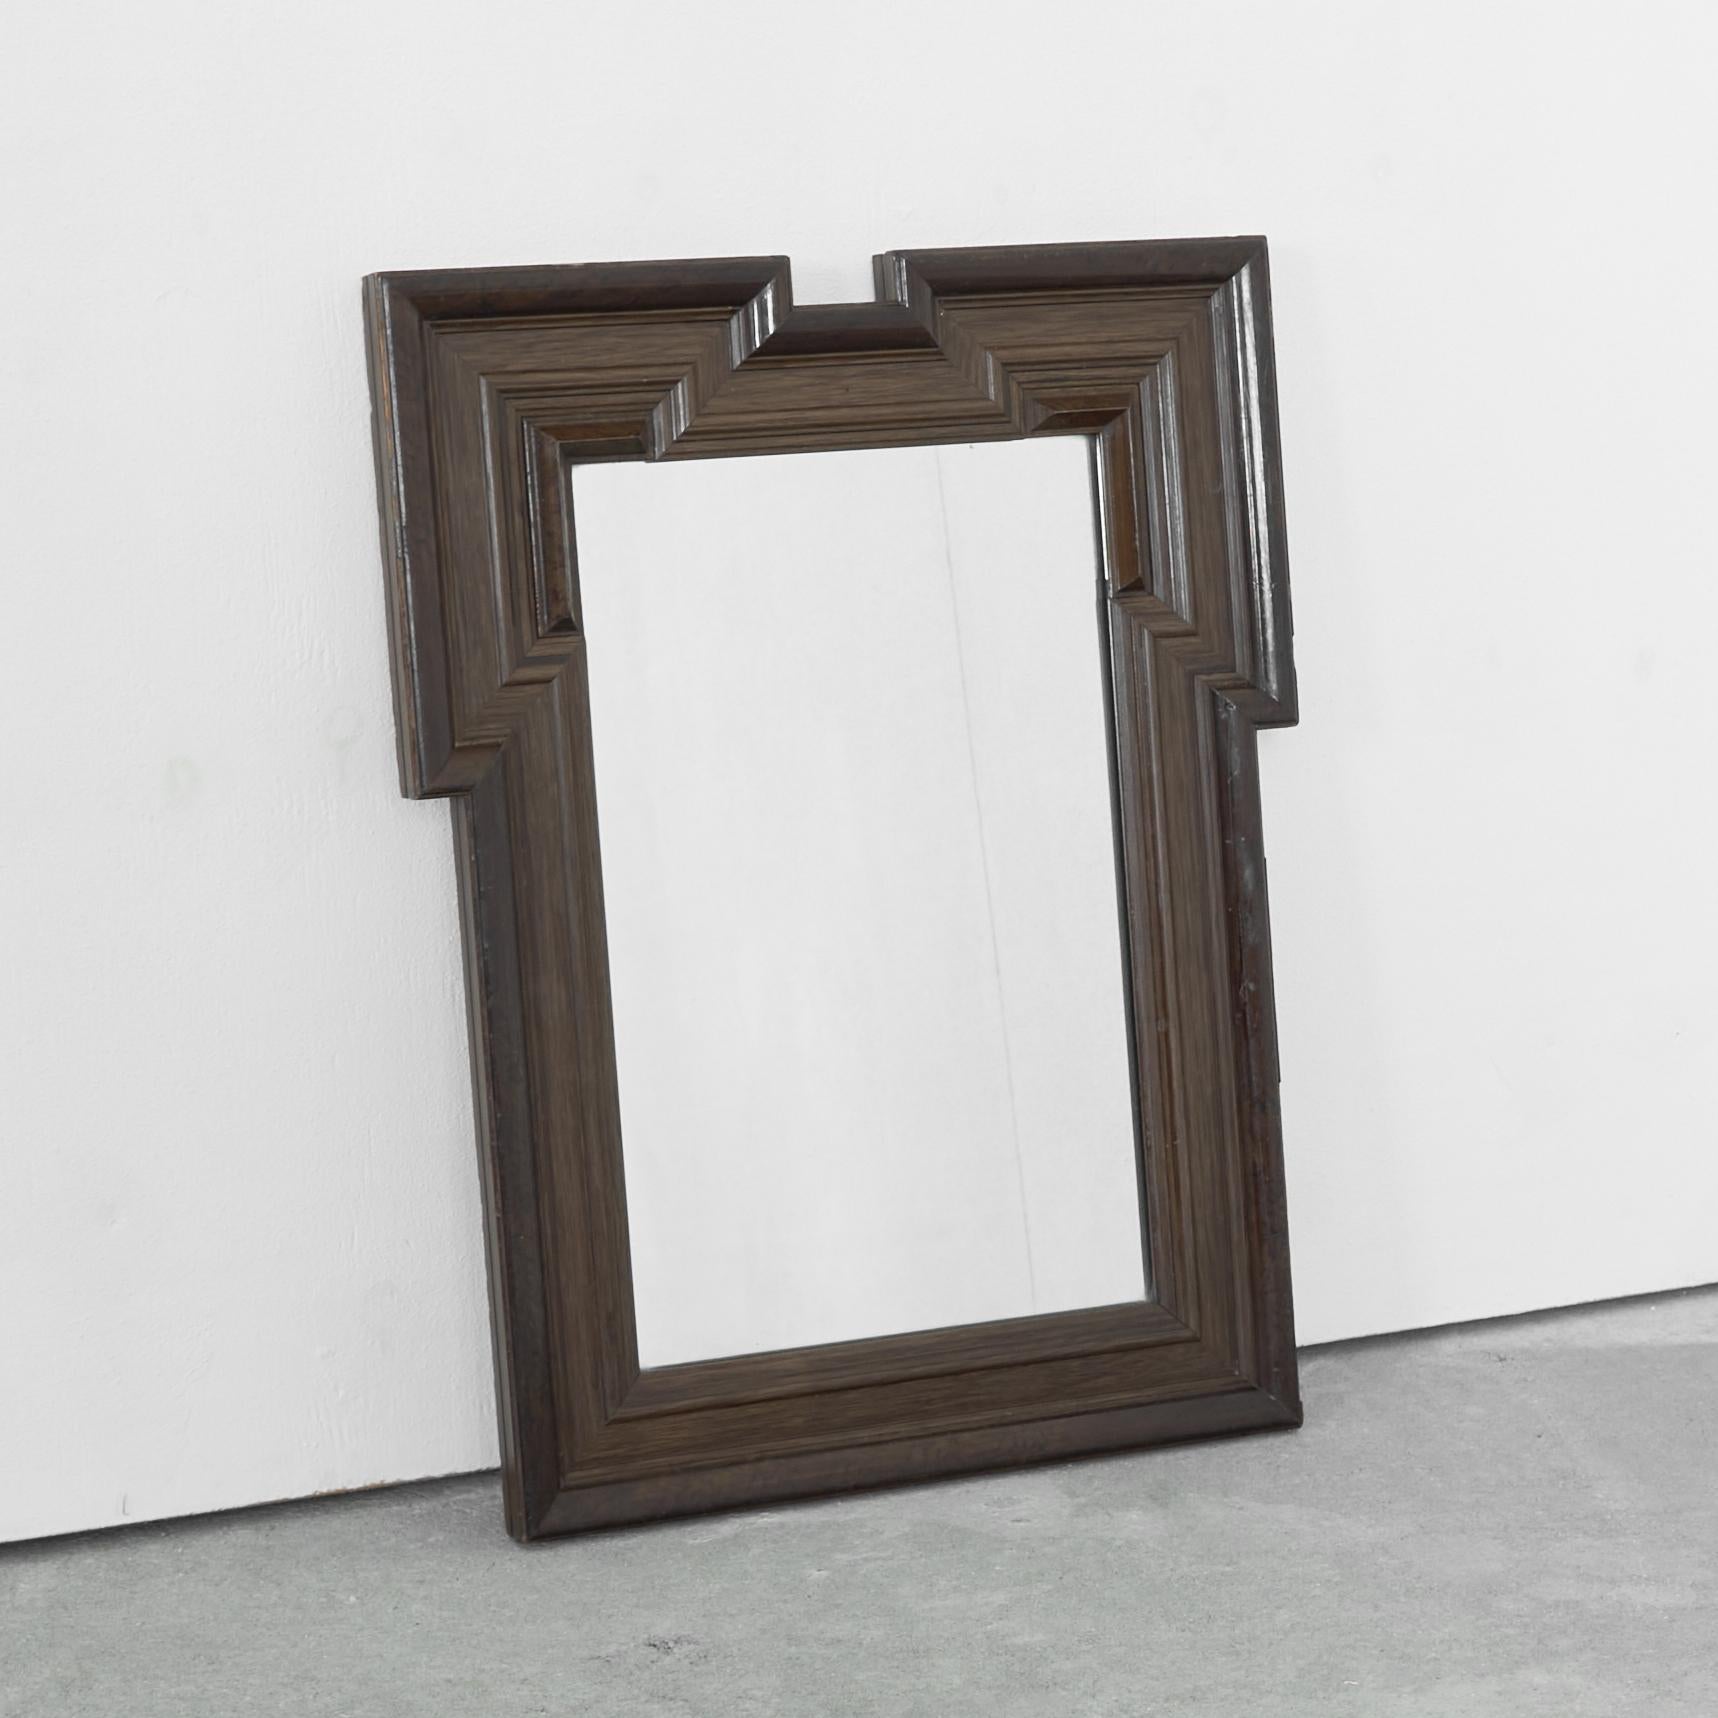 European Art Deco Mirror in Carved Wood 1930s For Sale